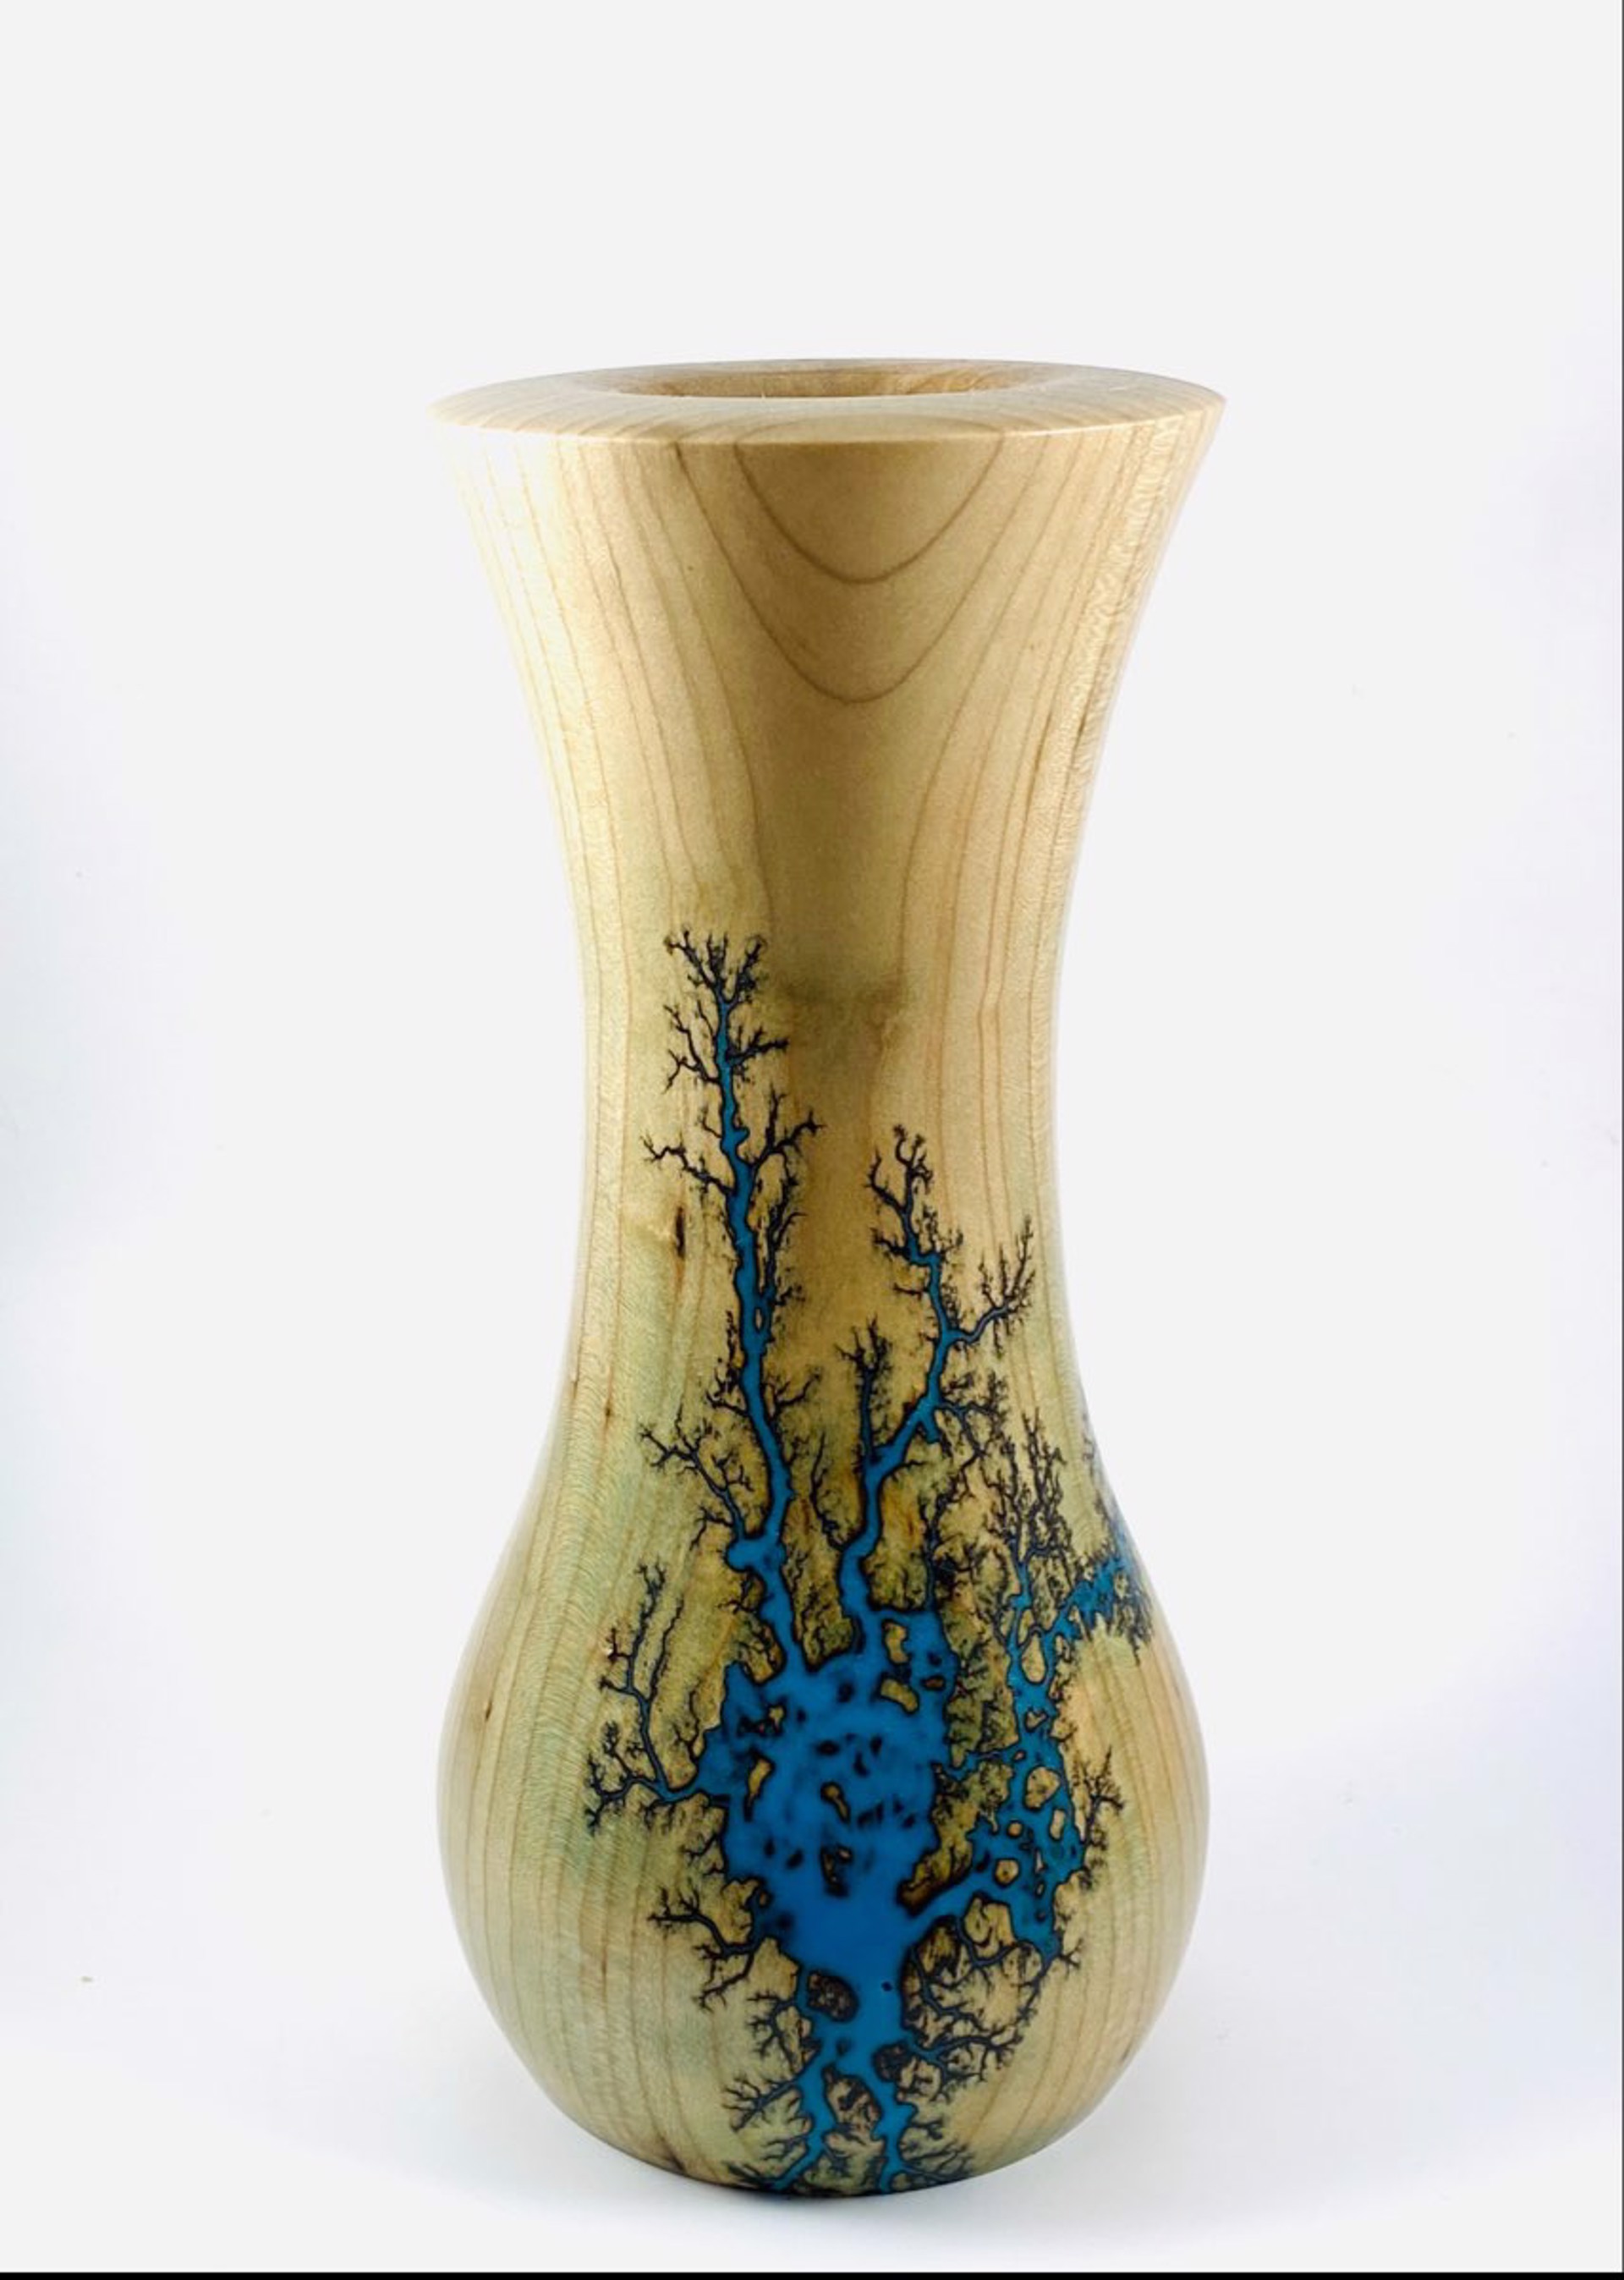 Vase HB23-28 by Hart Brothers